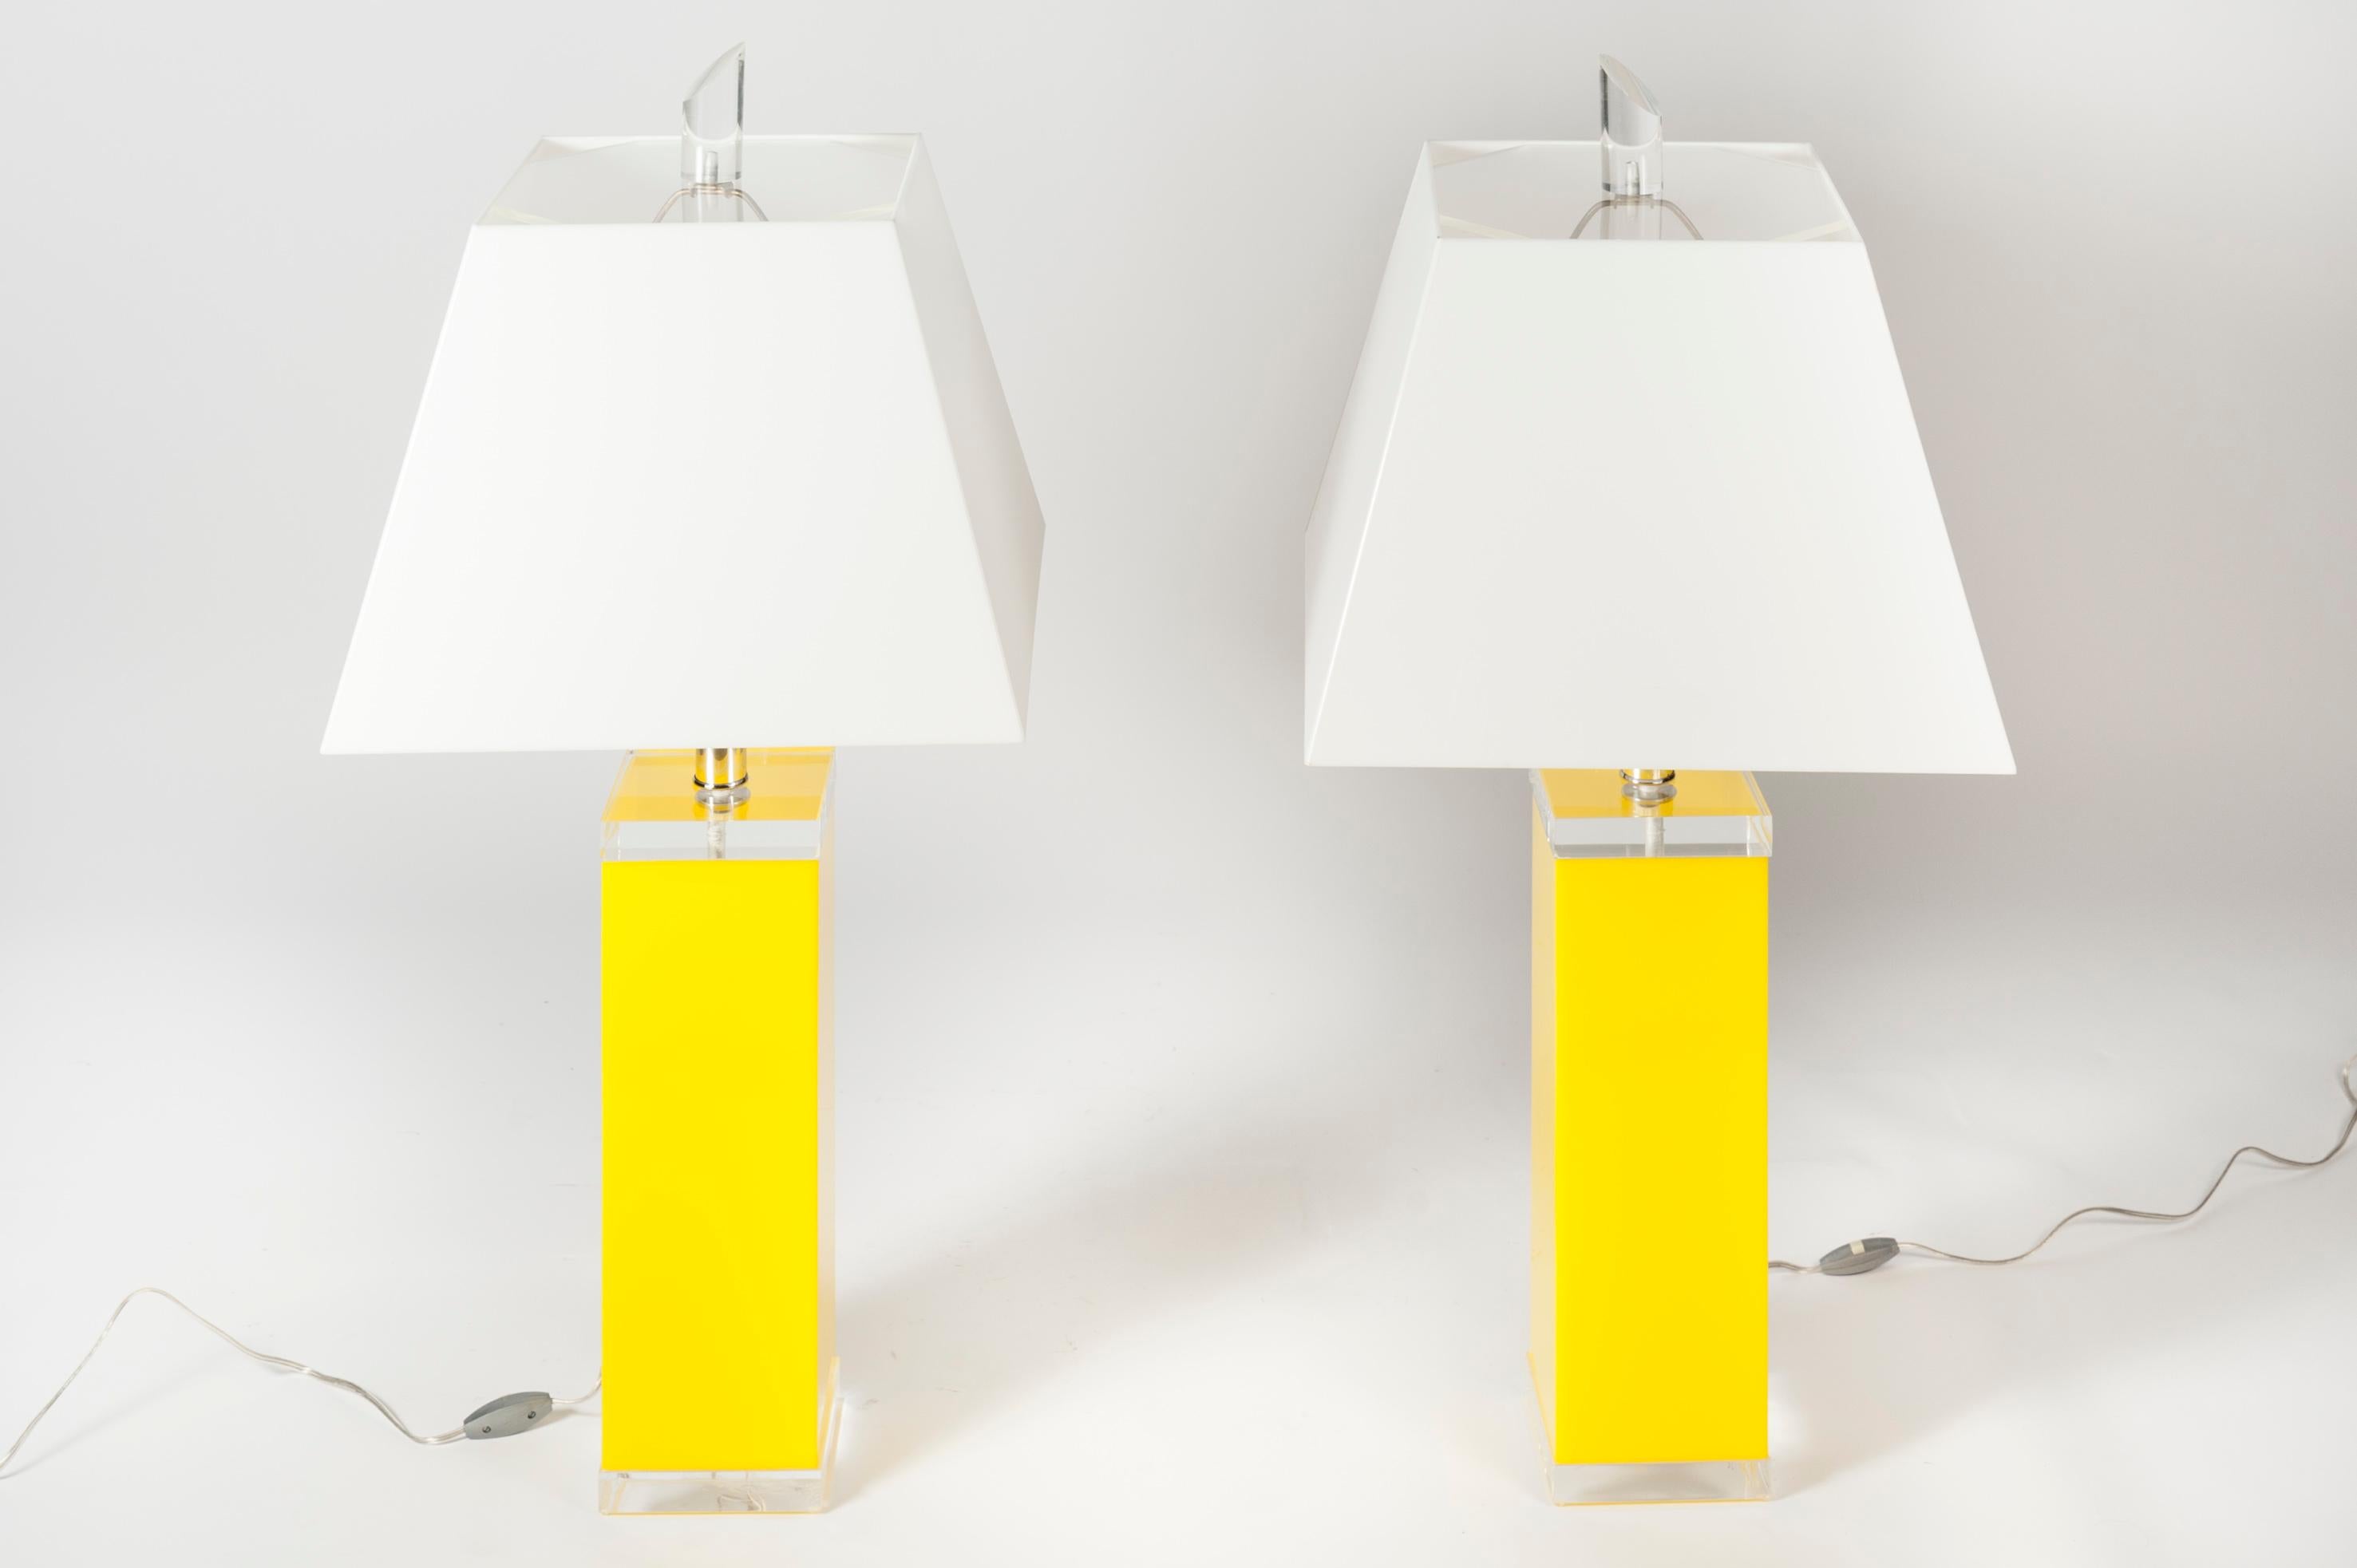 Pair of Plexiglass table lamps
Perfect condition.